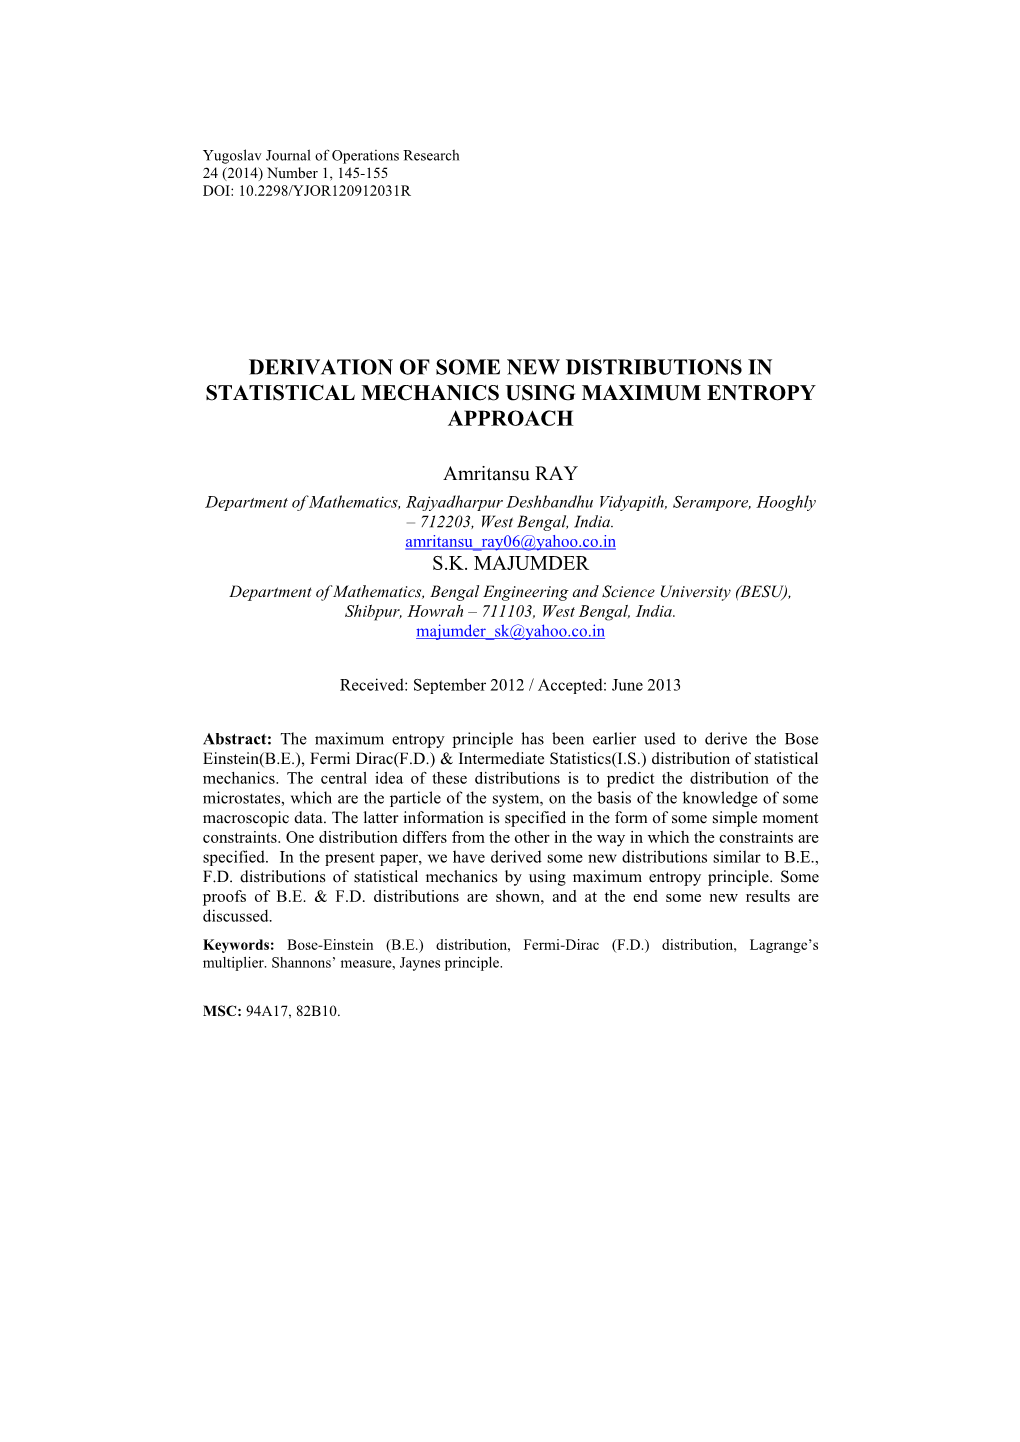 Derivation of Some New Distributions in Statistical Mechanics Using Maximum Entropy Approach